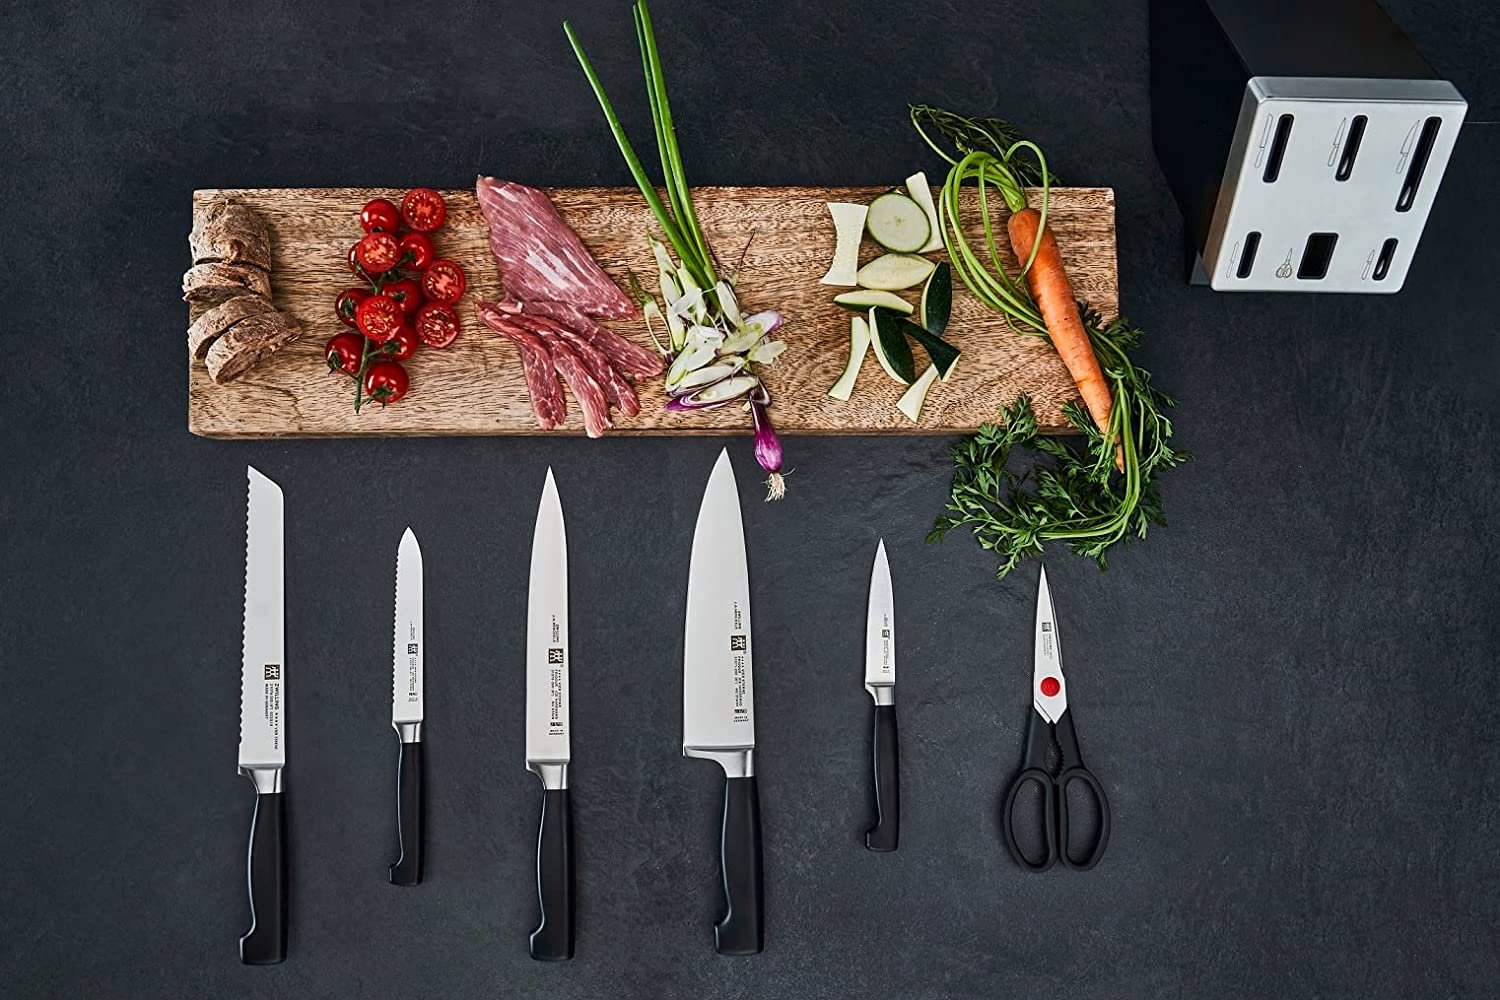 ZWILLING J.A. Henckels Zwilling Pro 7-piece Self-Sharpening Knife